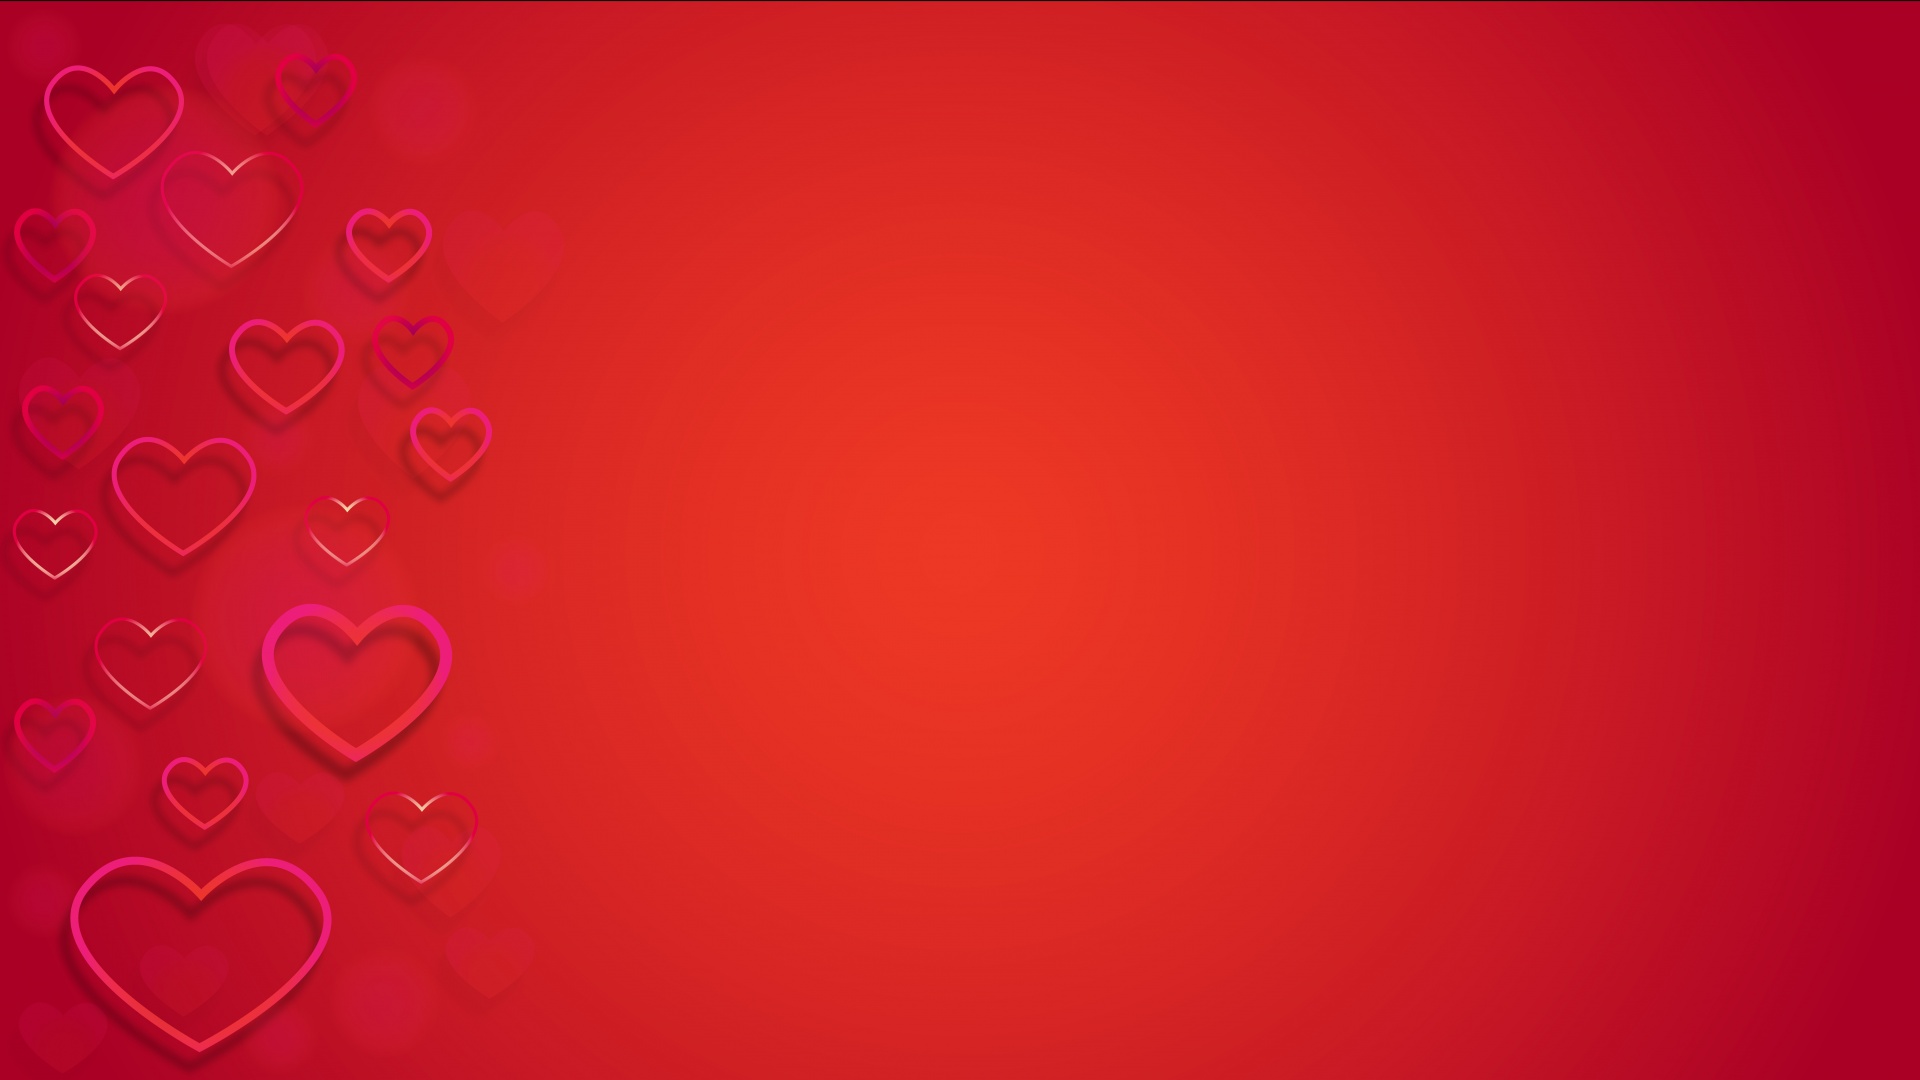 Pictures, Free Photos, Free Images, Royalty Free, Free - Vaentines Day Background - HD Wallpaper 